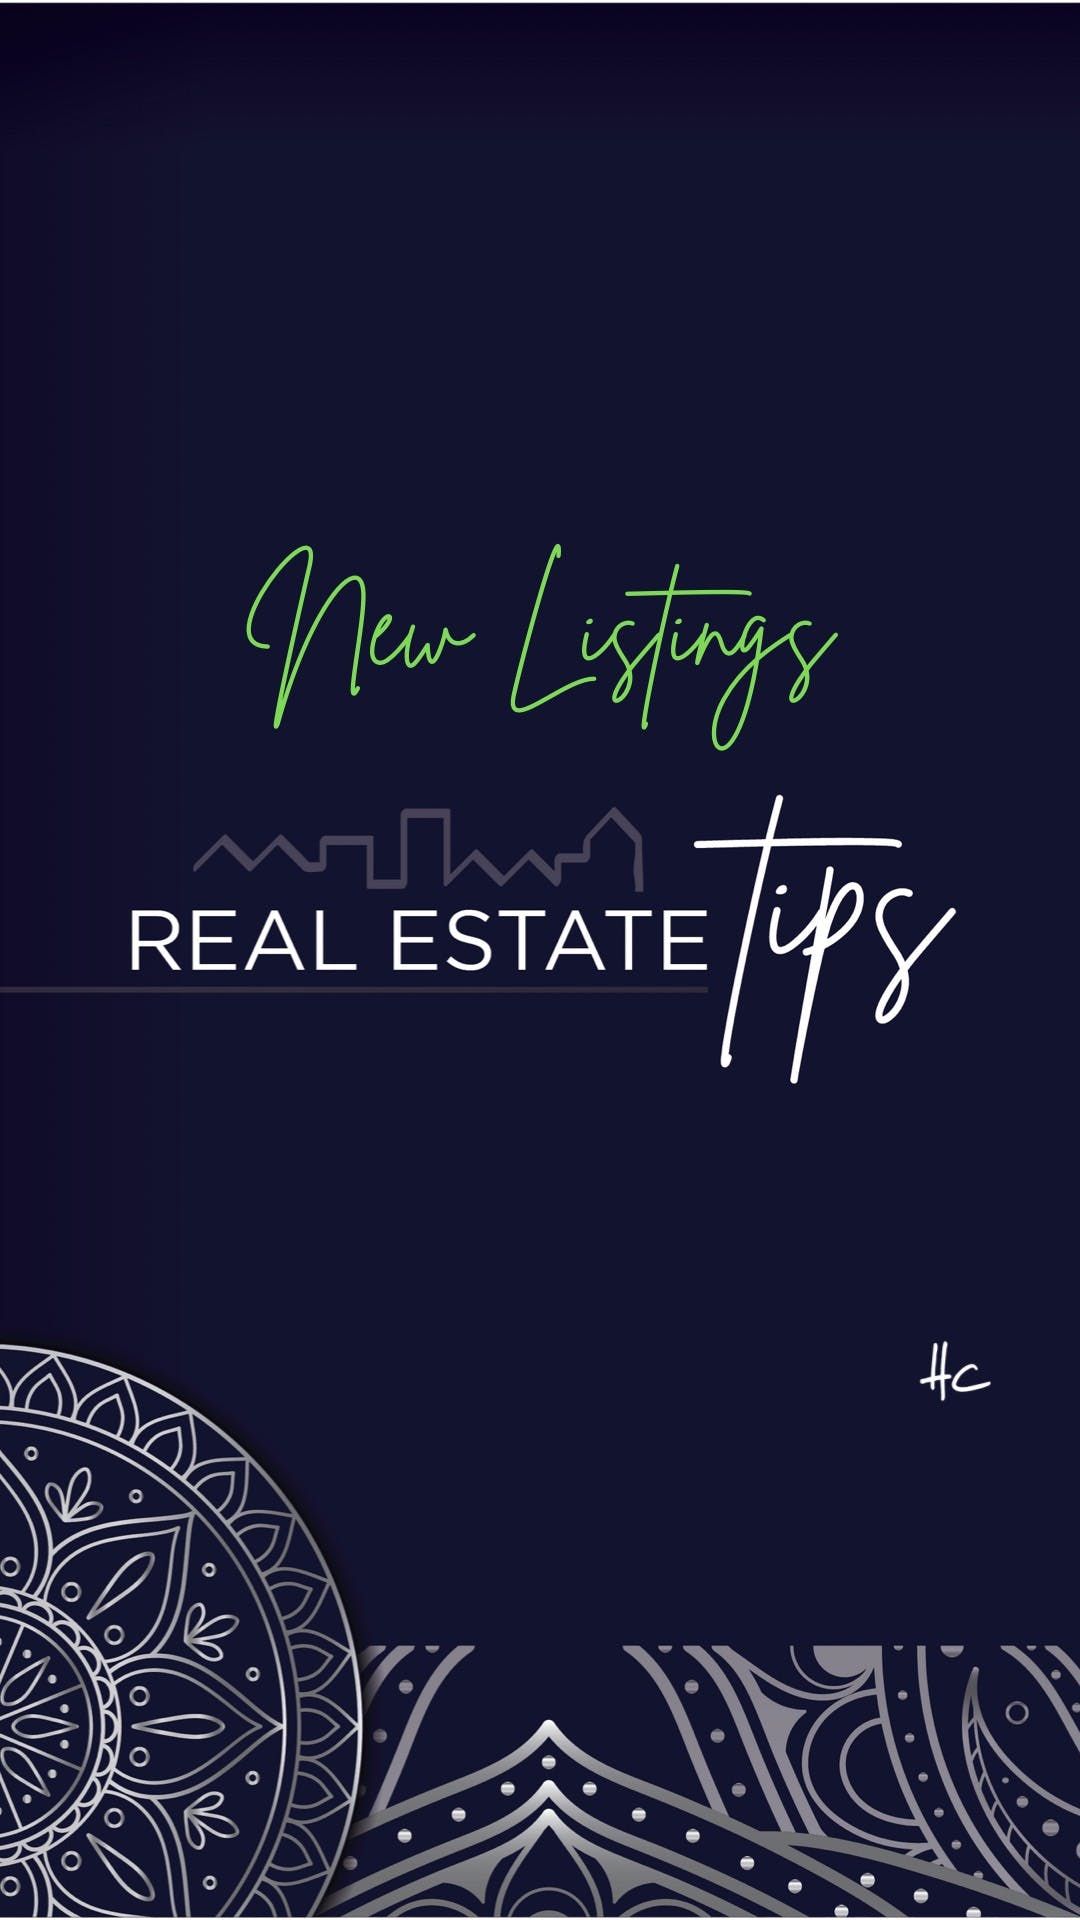 Real Estate Tips – New Listings